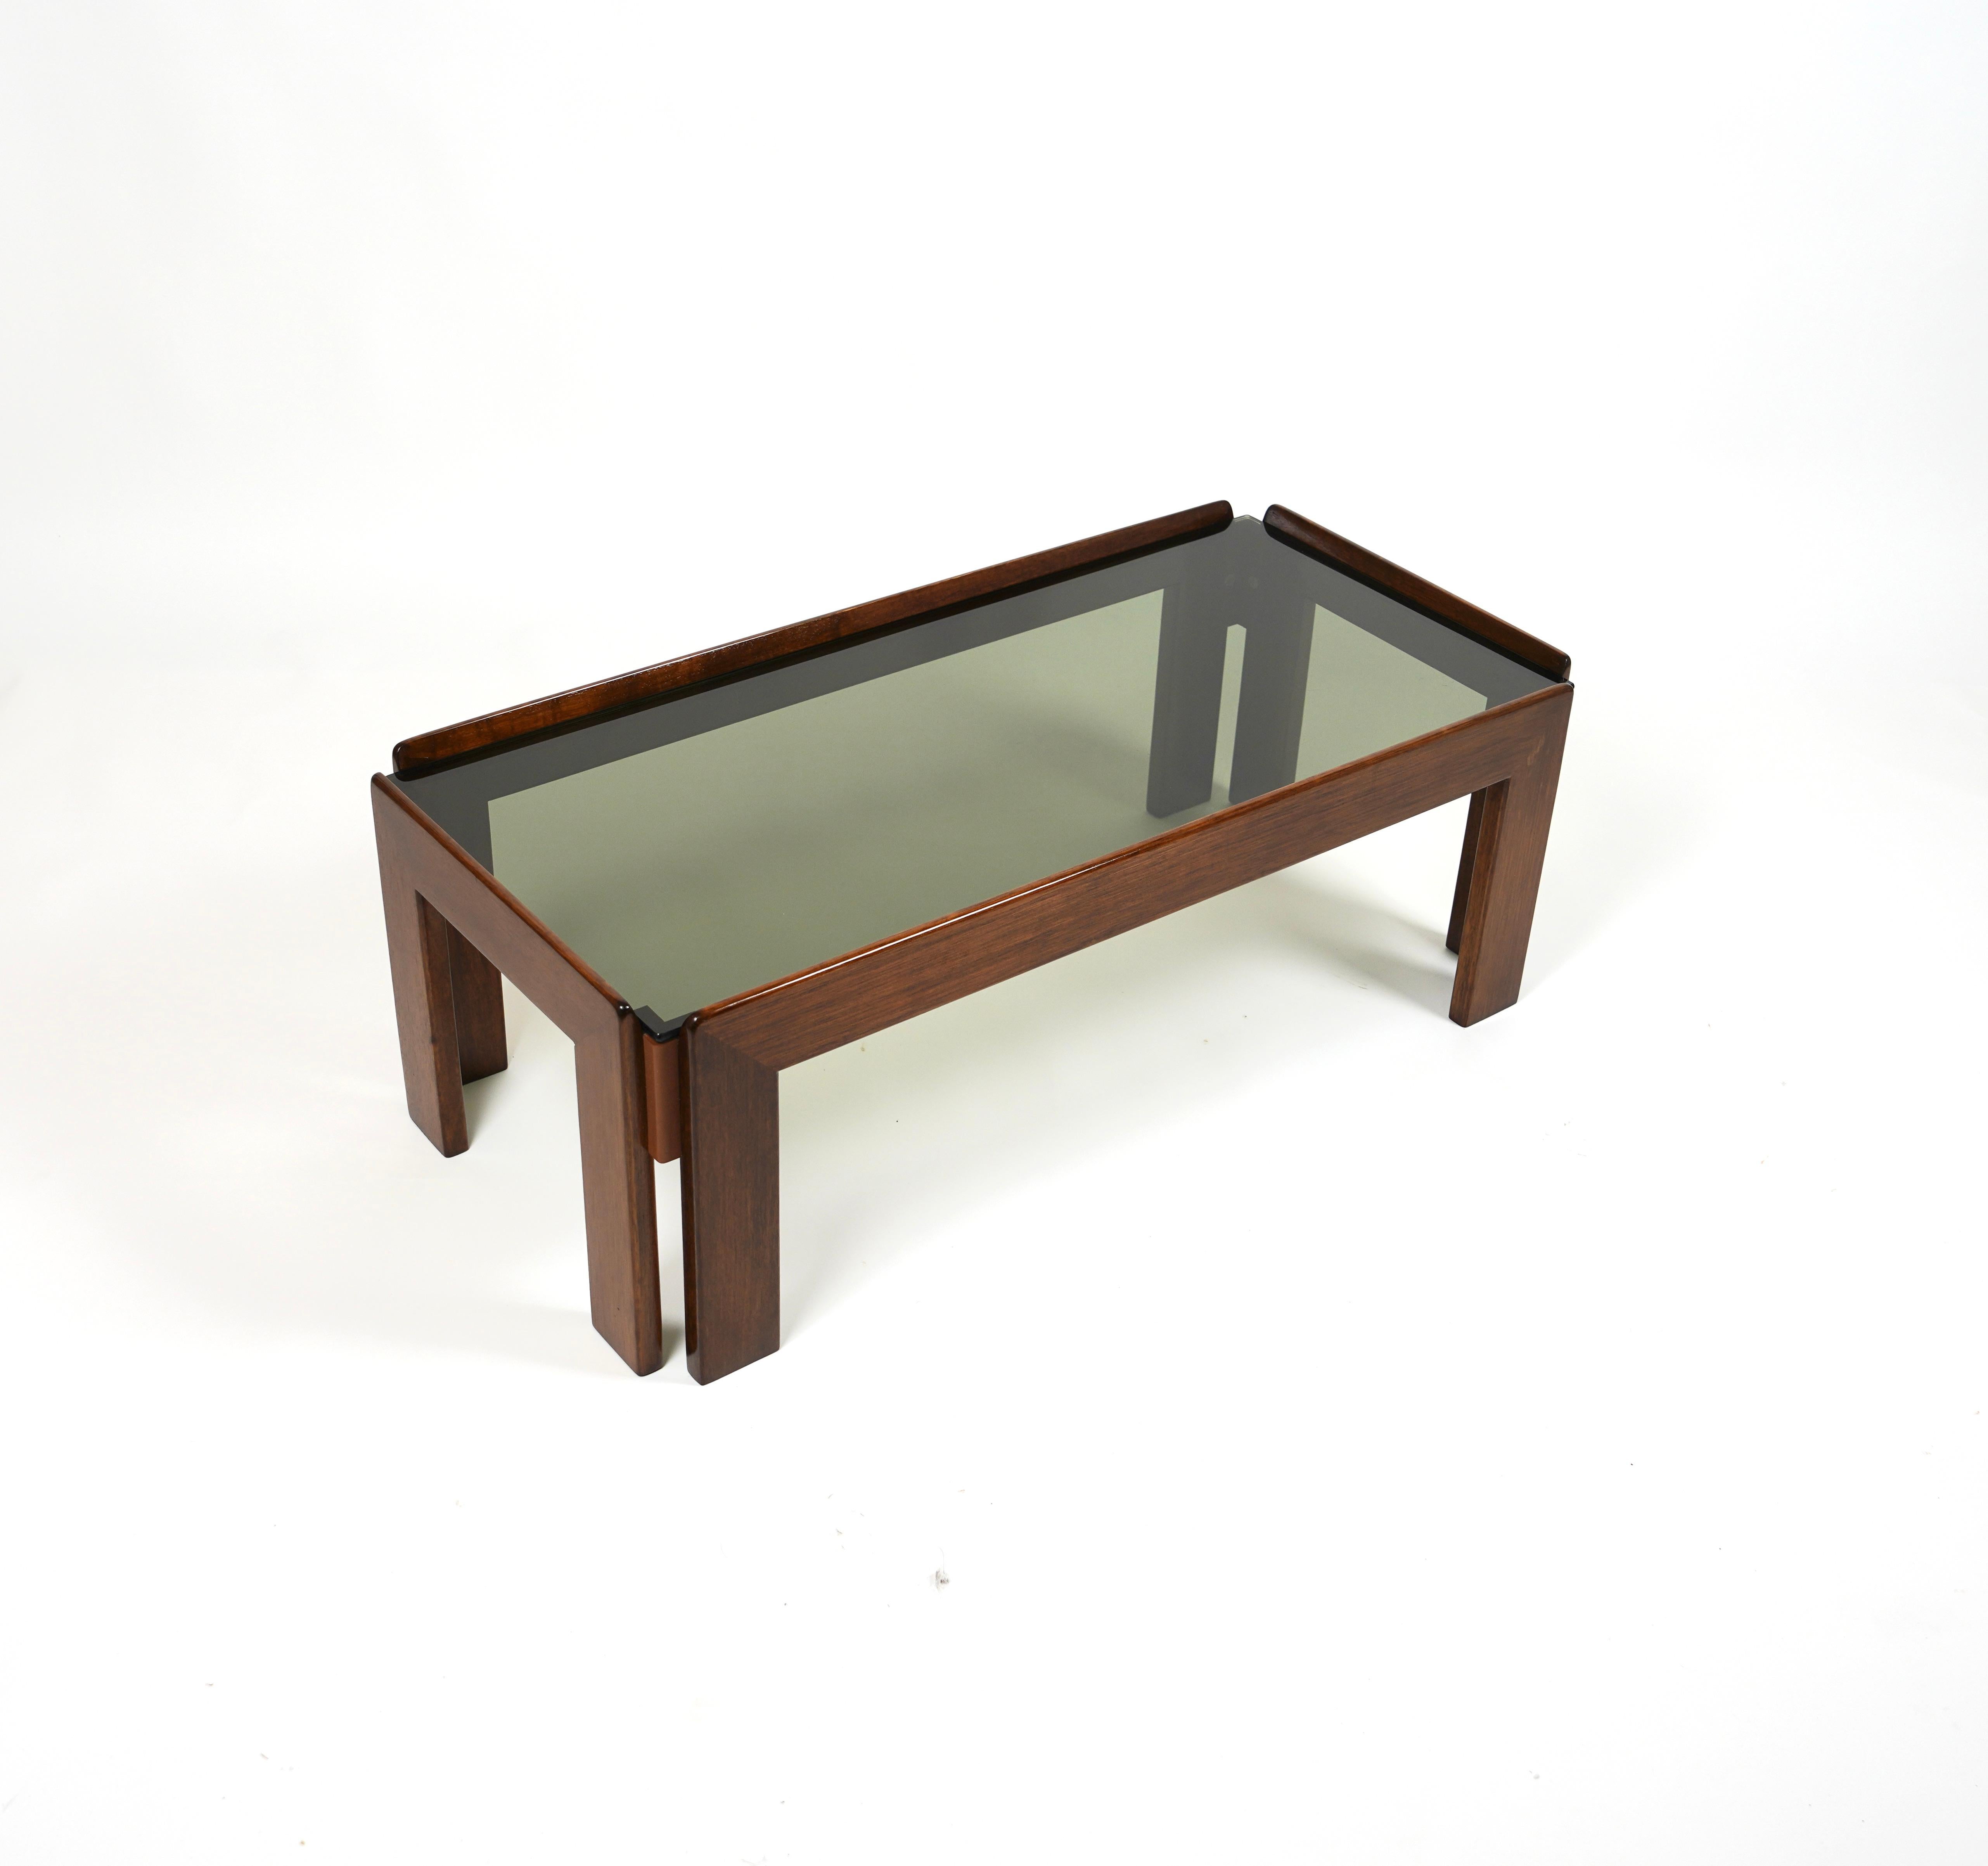 midcentury Rectangular coffee table in solid wood and smoked glass top by Afra & Tobia Scarpa for Cassina.

Made in Italy in the 1960s.

Wood has been polished by a professional restorer.

Chic, distinctive, and cool, the work of